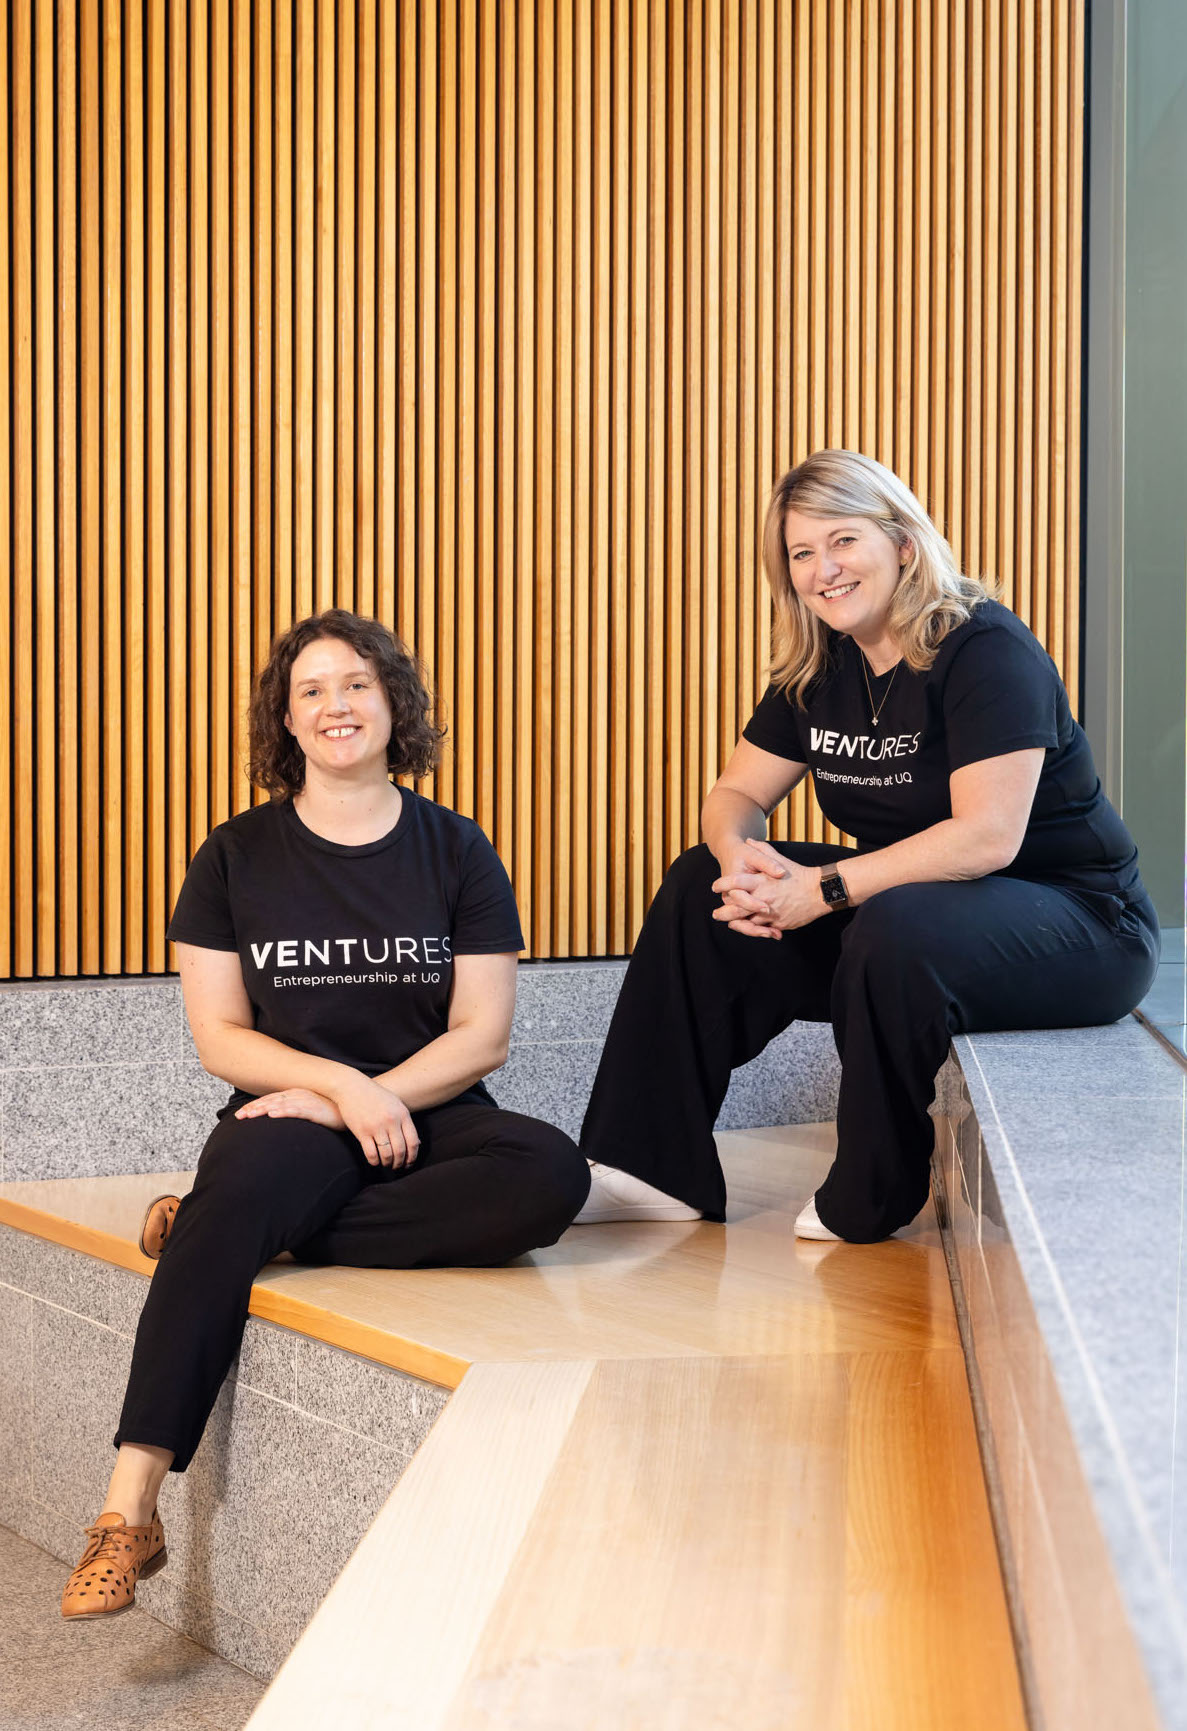 Ventures staff sitting on step with wood panelling in background